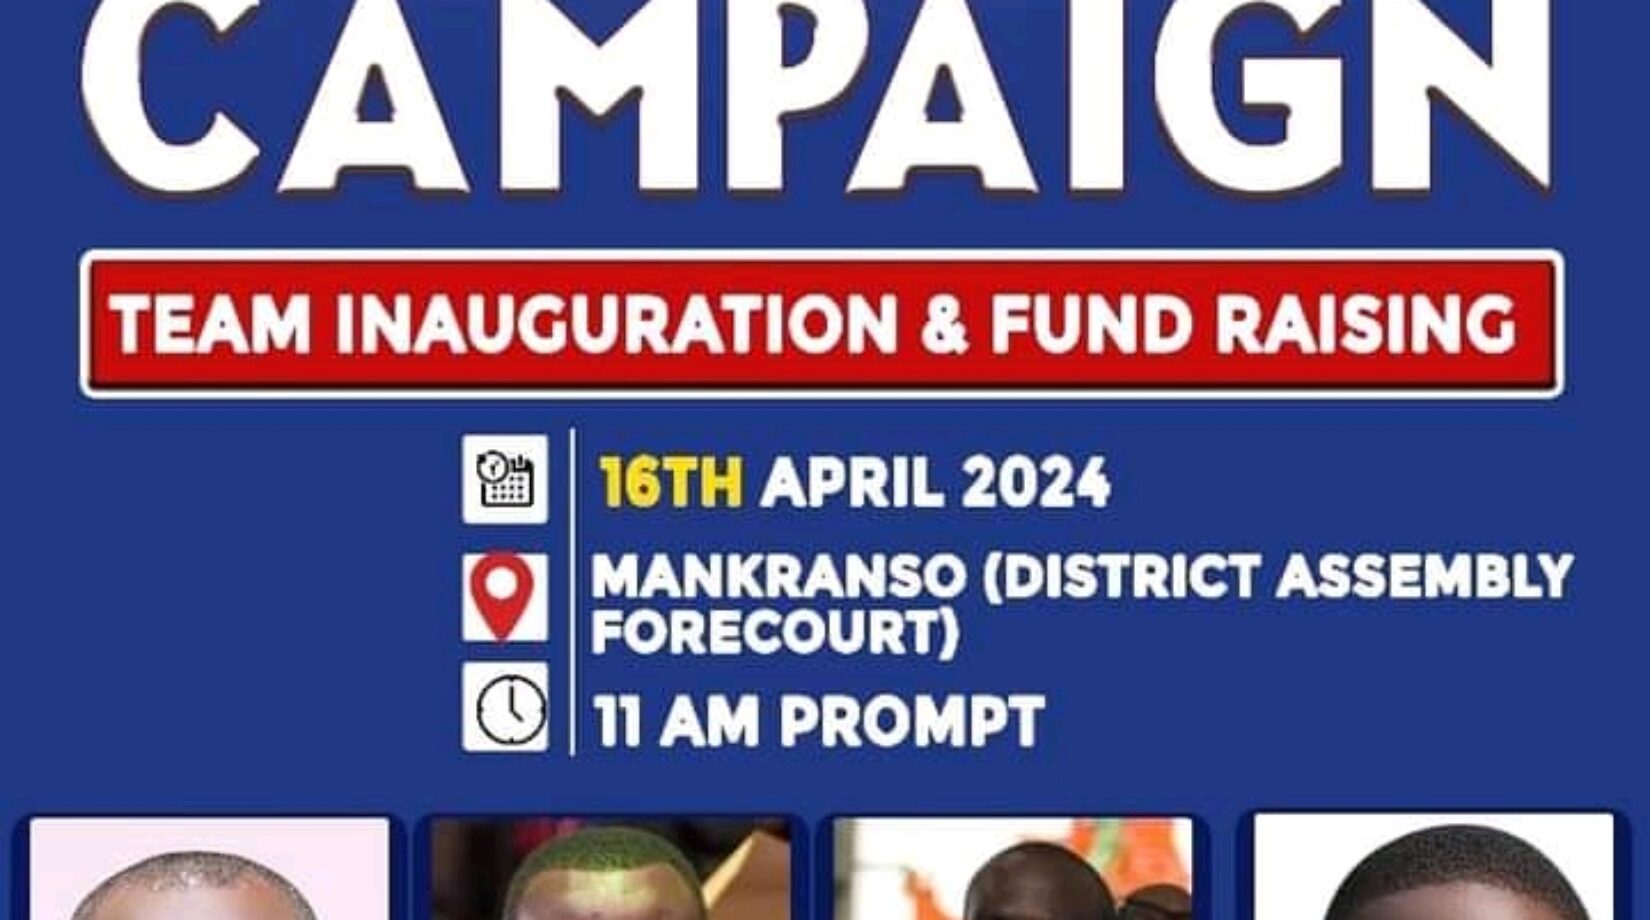 Ahafo Ano South West Campaign Team To Be Inaugurated